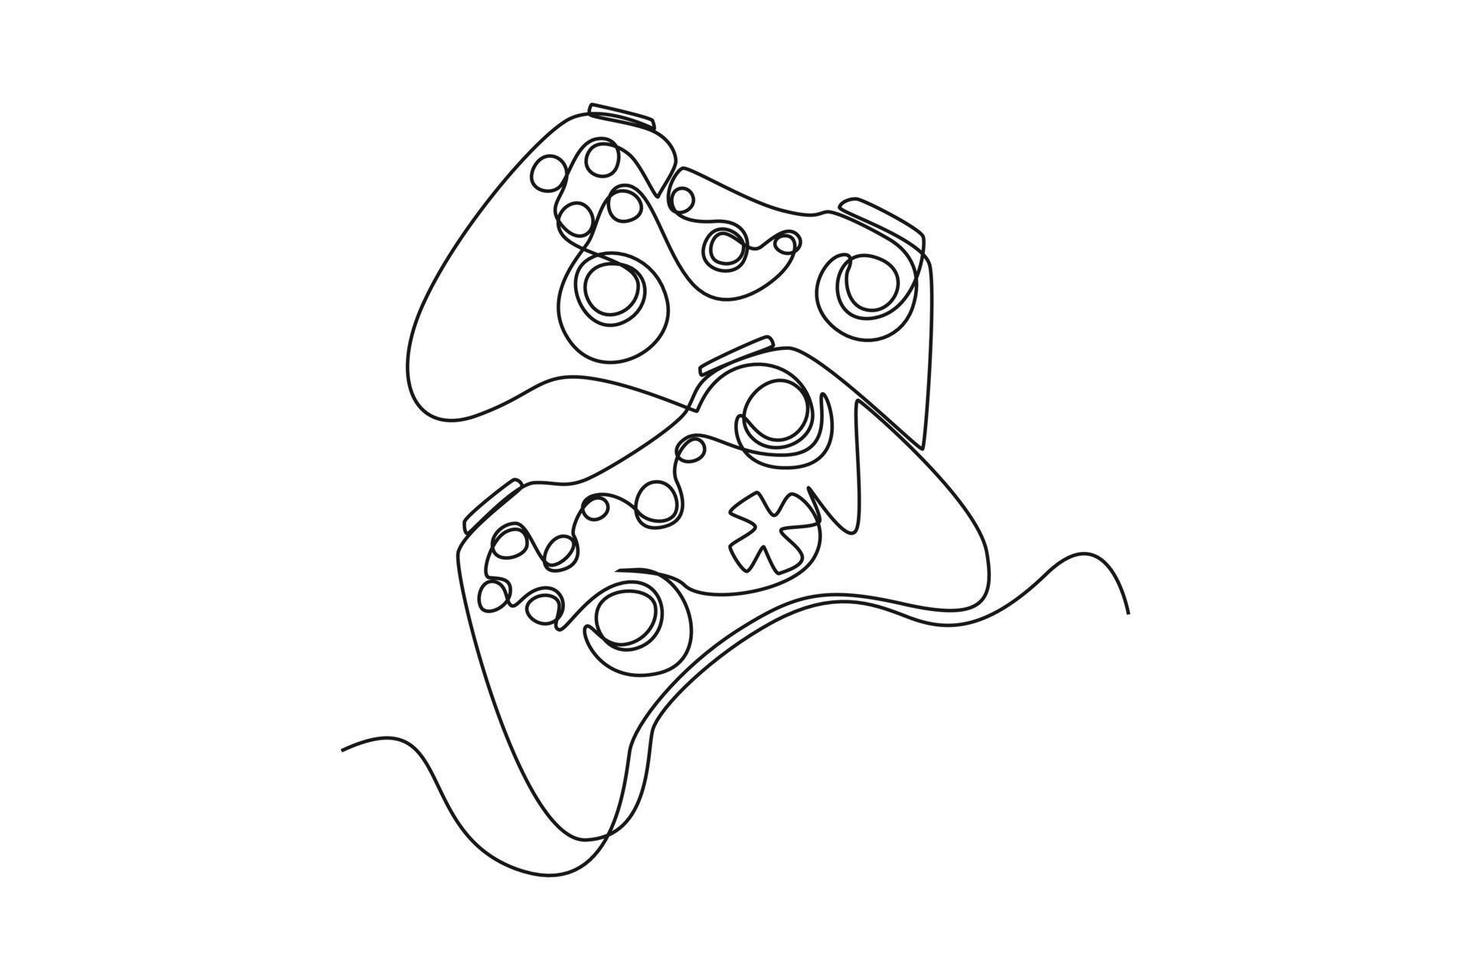 Single one line drawing gamepad from game consoles. E-sports game concept. Continuous line draw design graphic vector illustration.